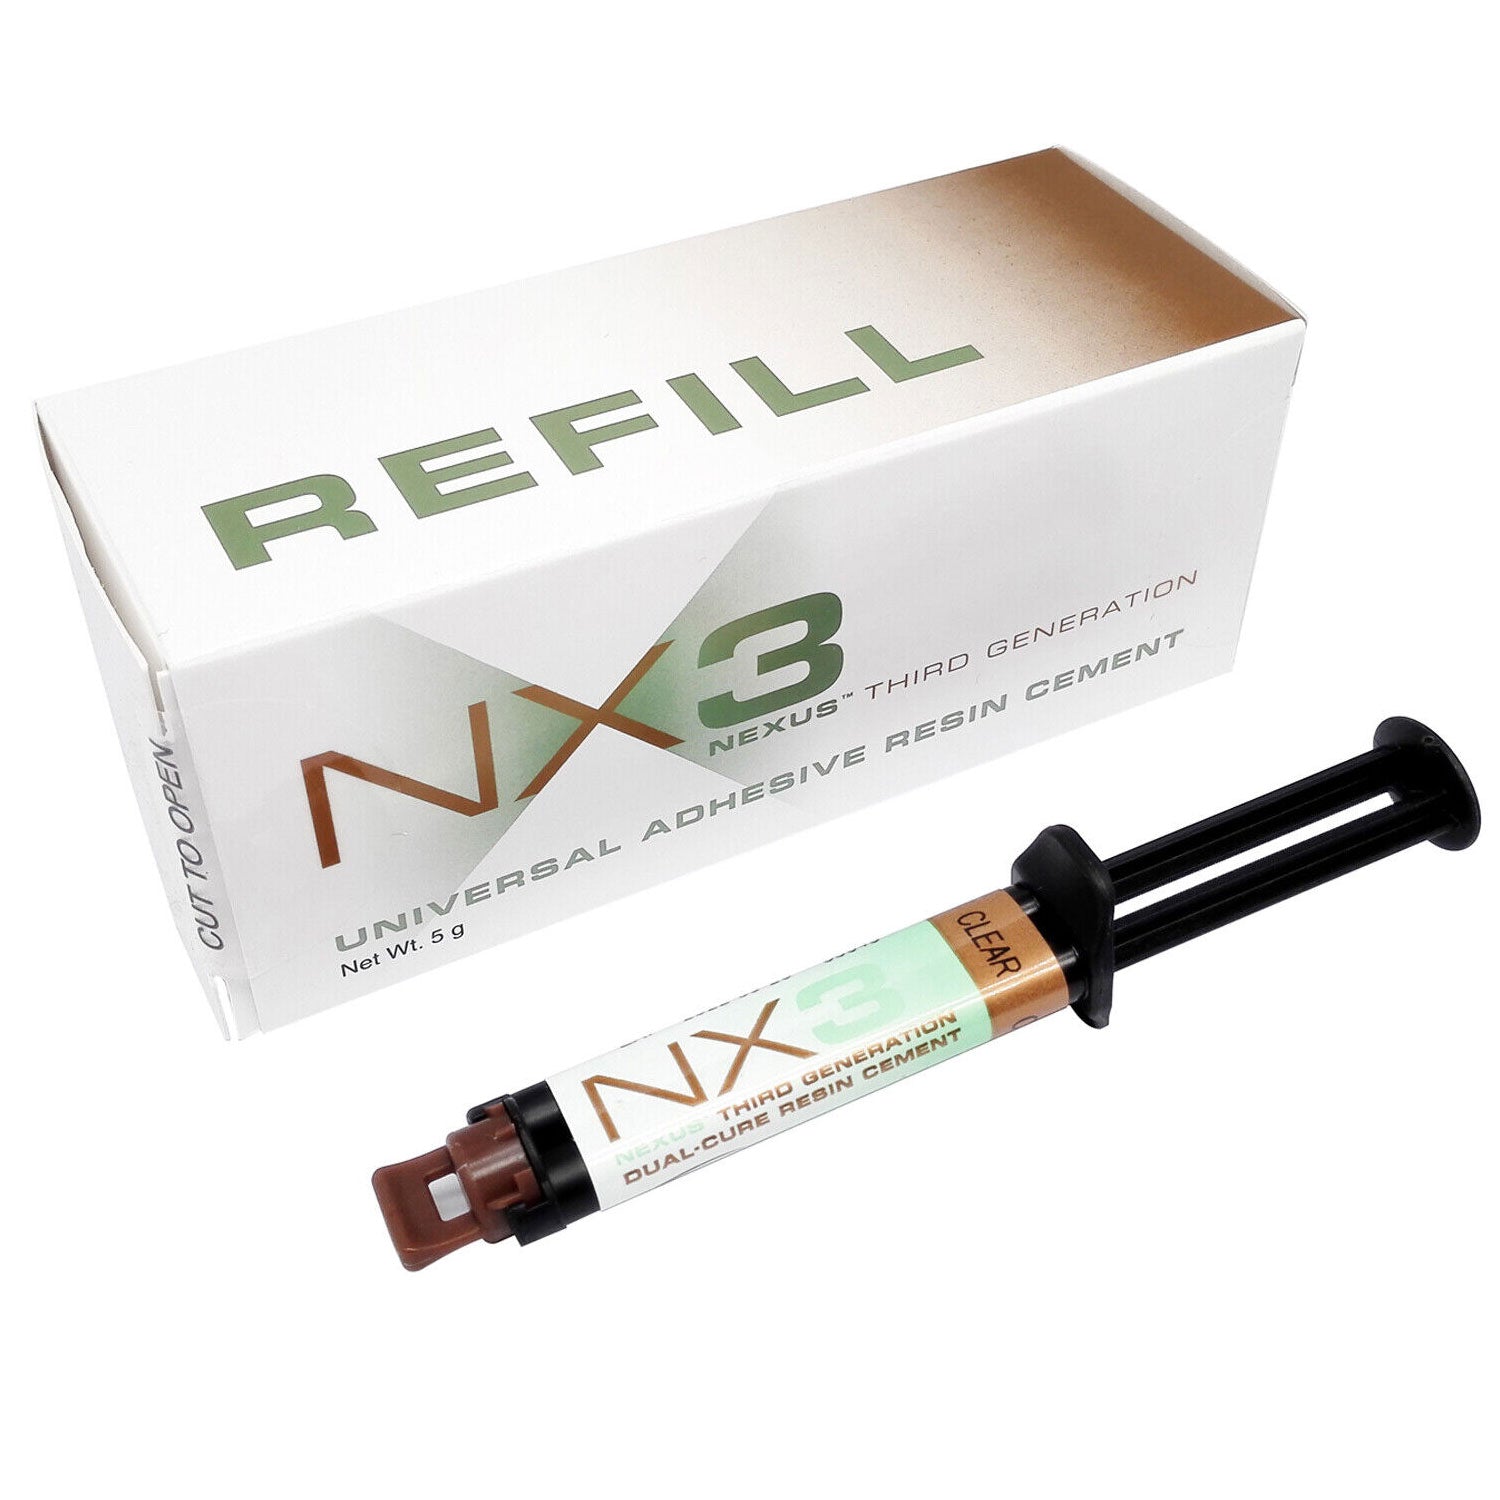 Kerr NX3 Dual-Cure Refill: Universal Adhesive Resin Cement - Clear Shade, 5g Automix Syringe